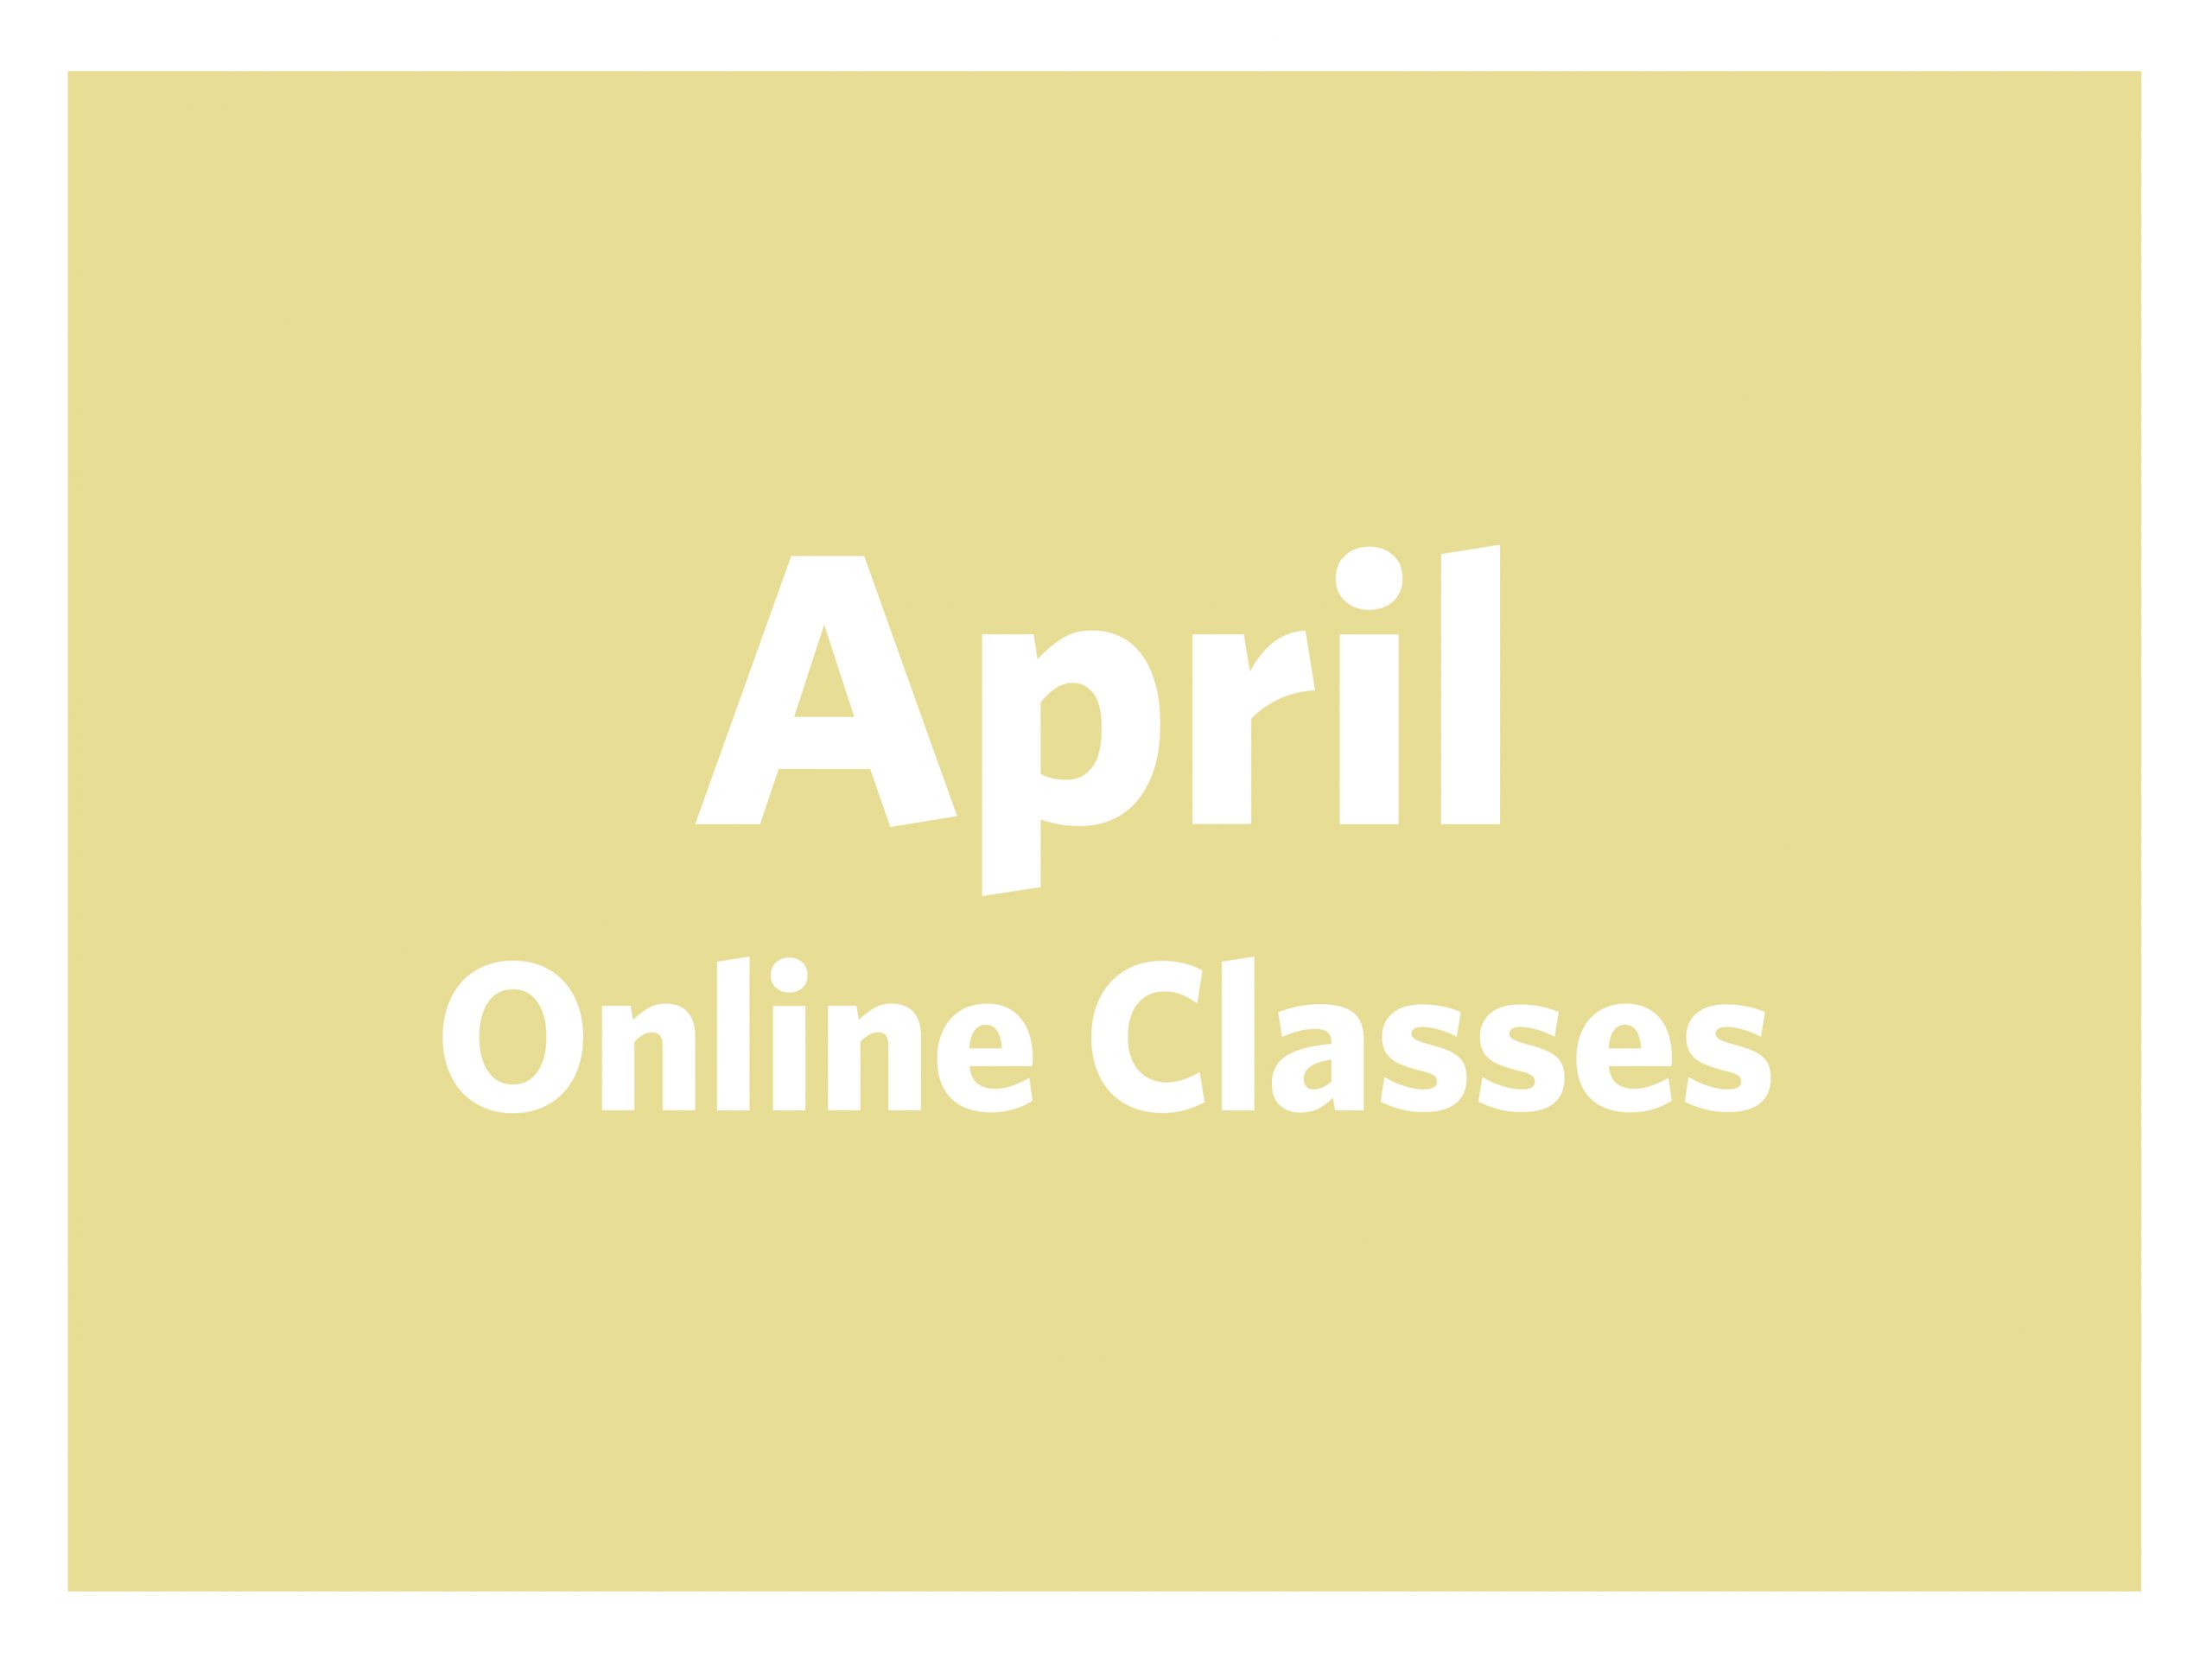 Featured Image for April Online Classes (#129461)